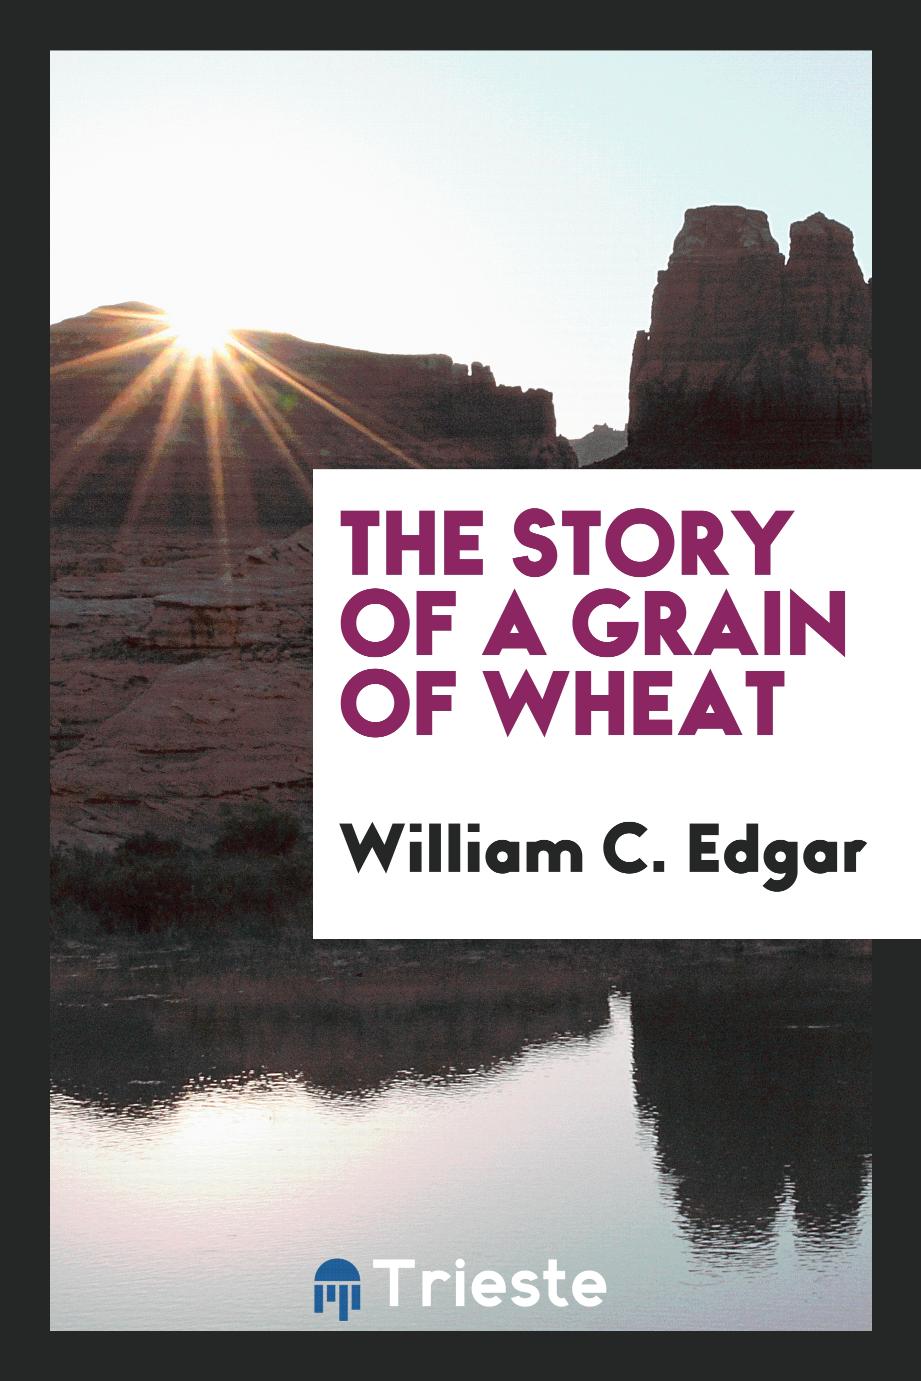 The story of a grain of wheat